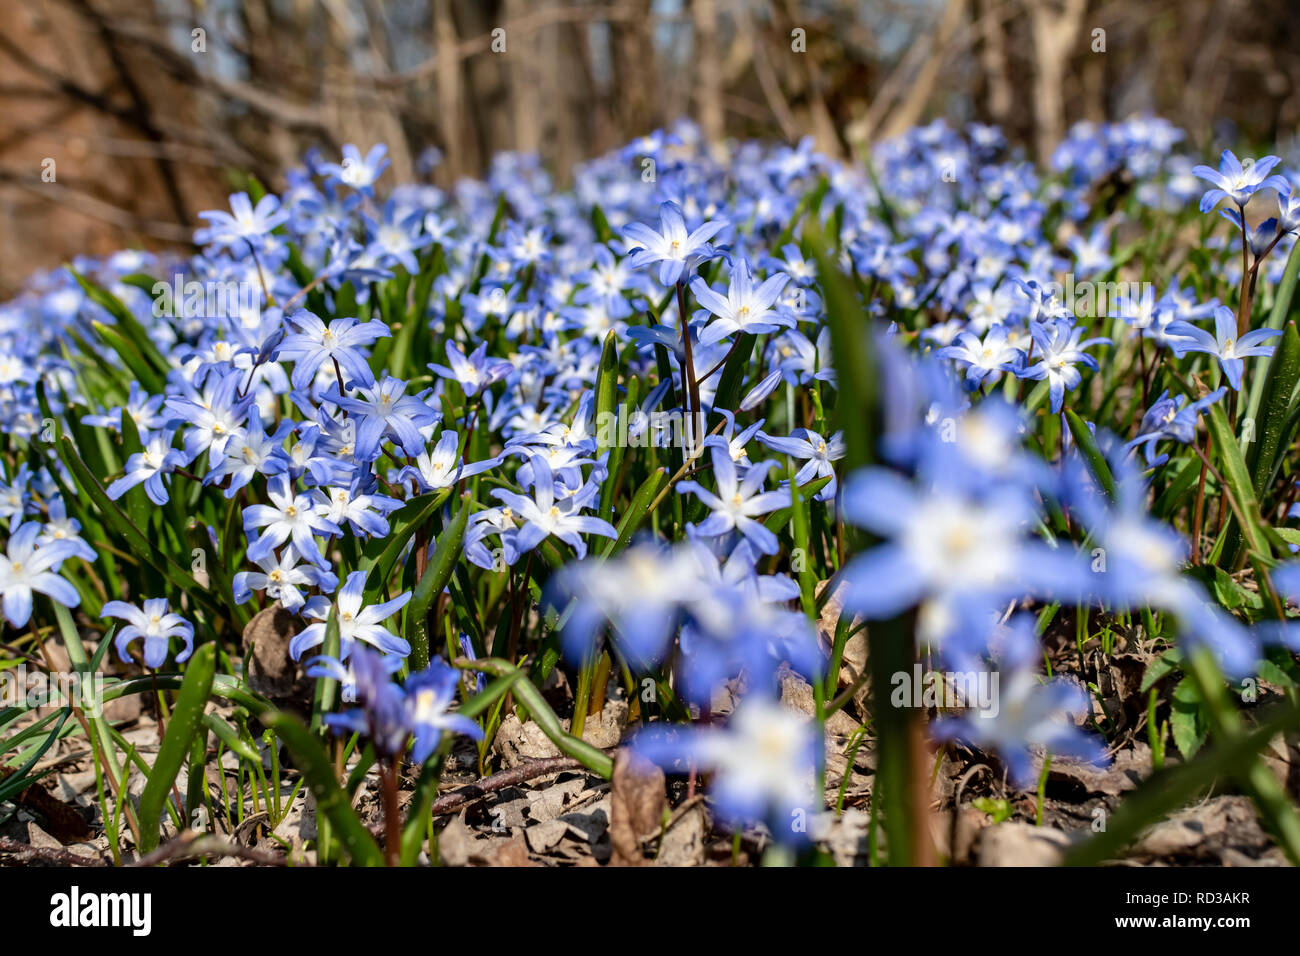 Close-up from many spring flowers named squill (genus Scilla), which grow on a forest glade. Stock Photo